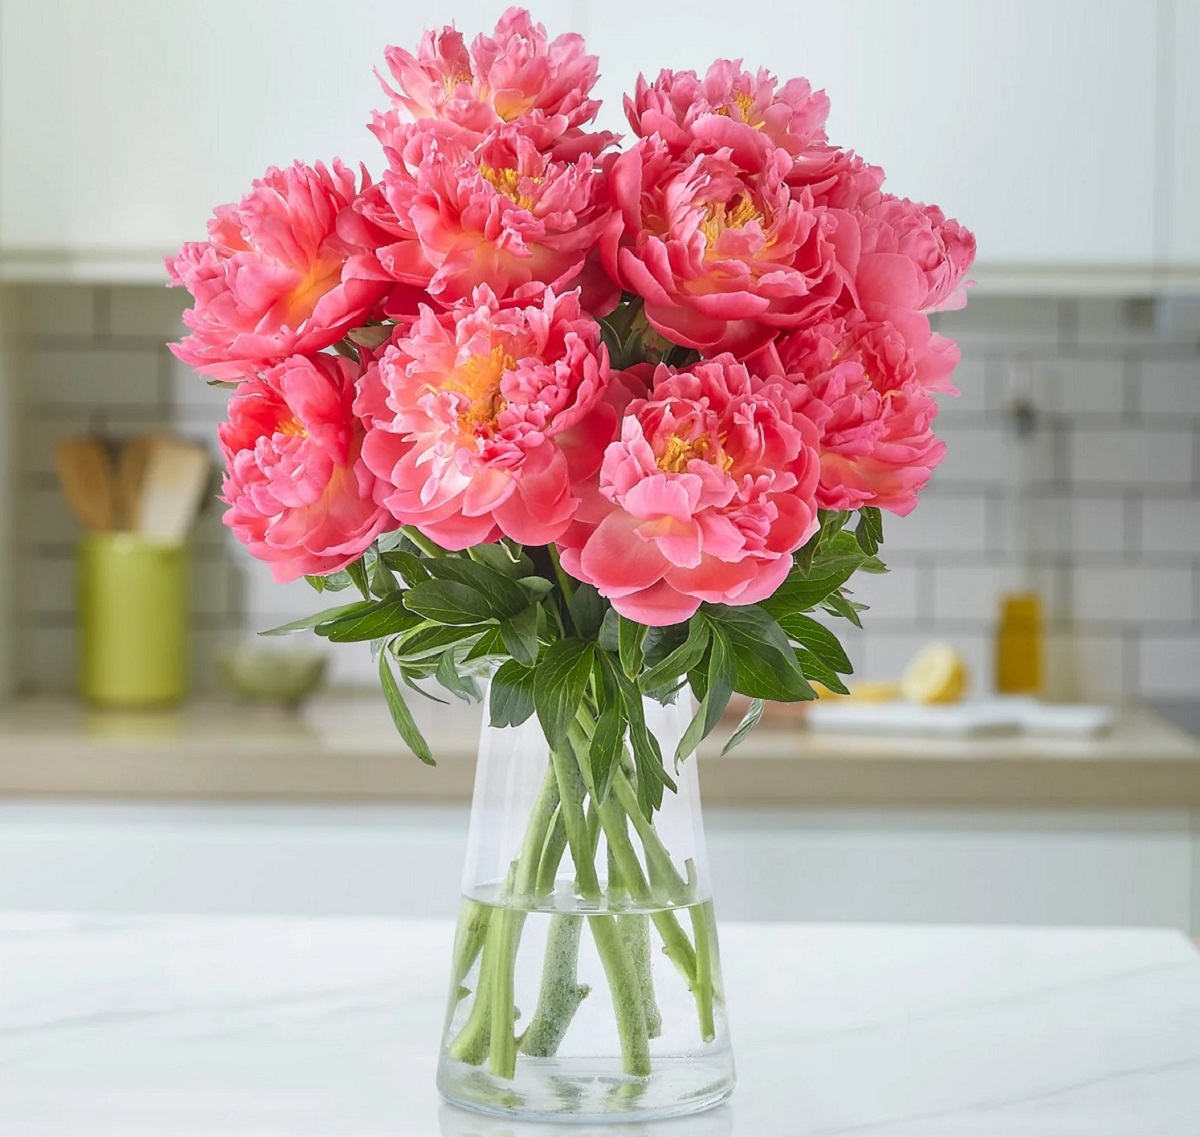 M&S colour-changing peonies on sale now – how to get yours